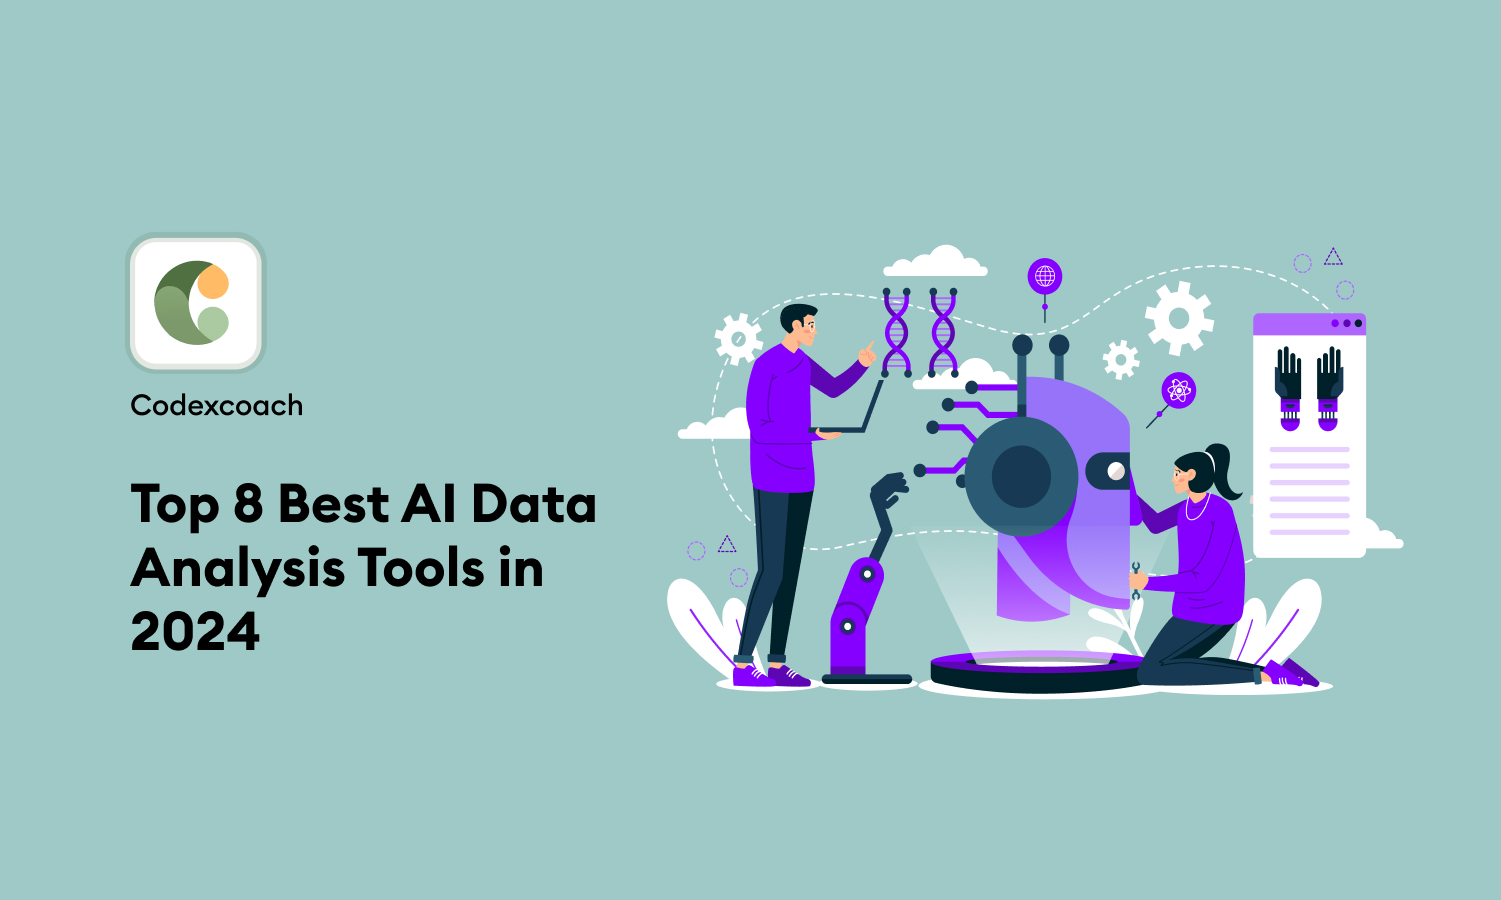 Top 8 Best AI Data Analysis Tools in 2024